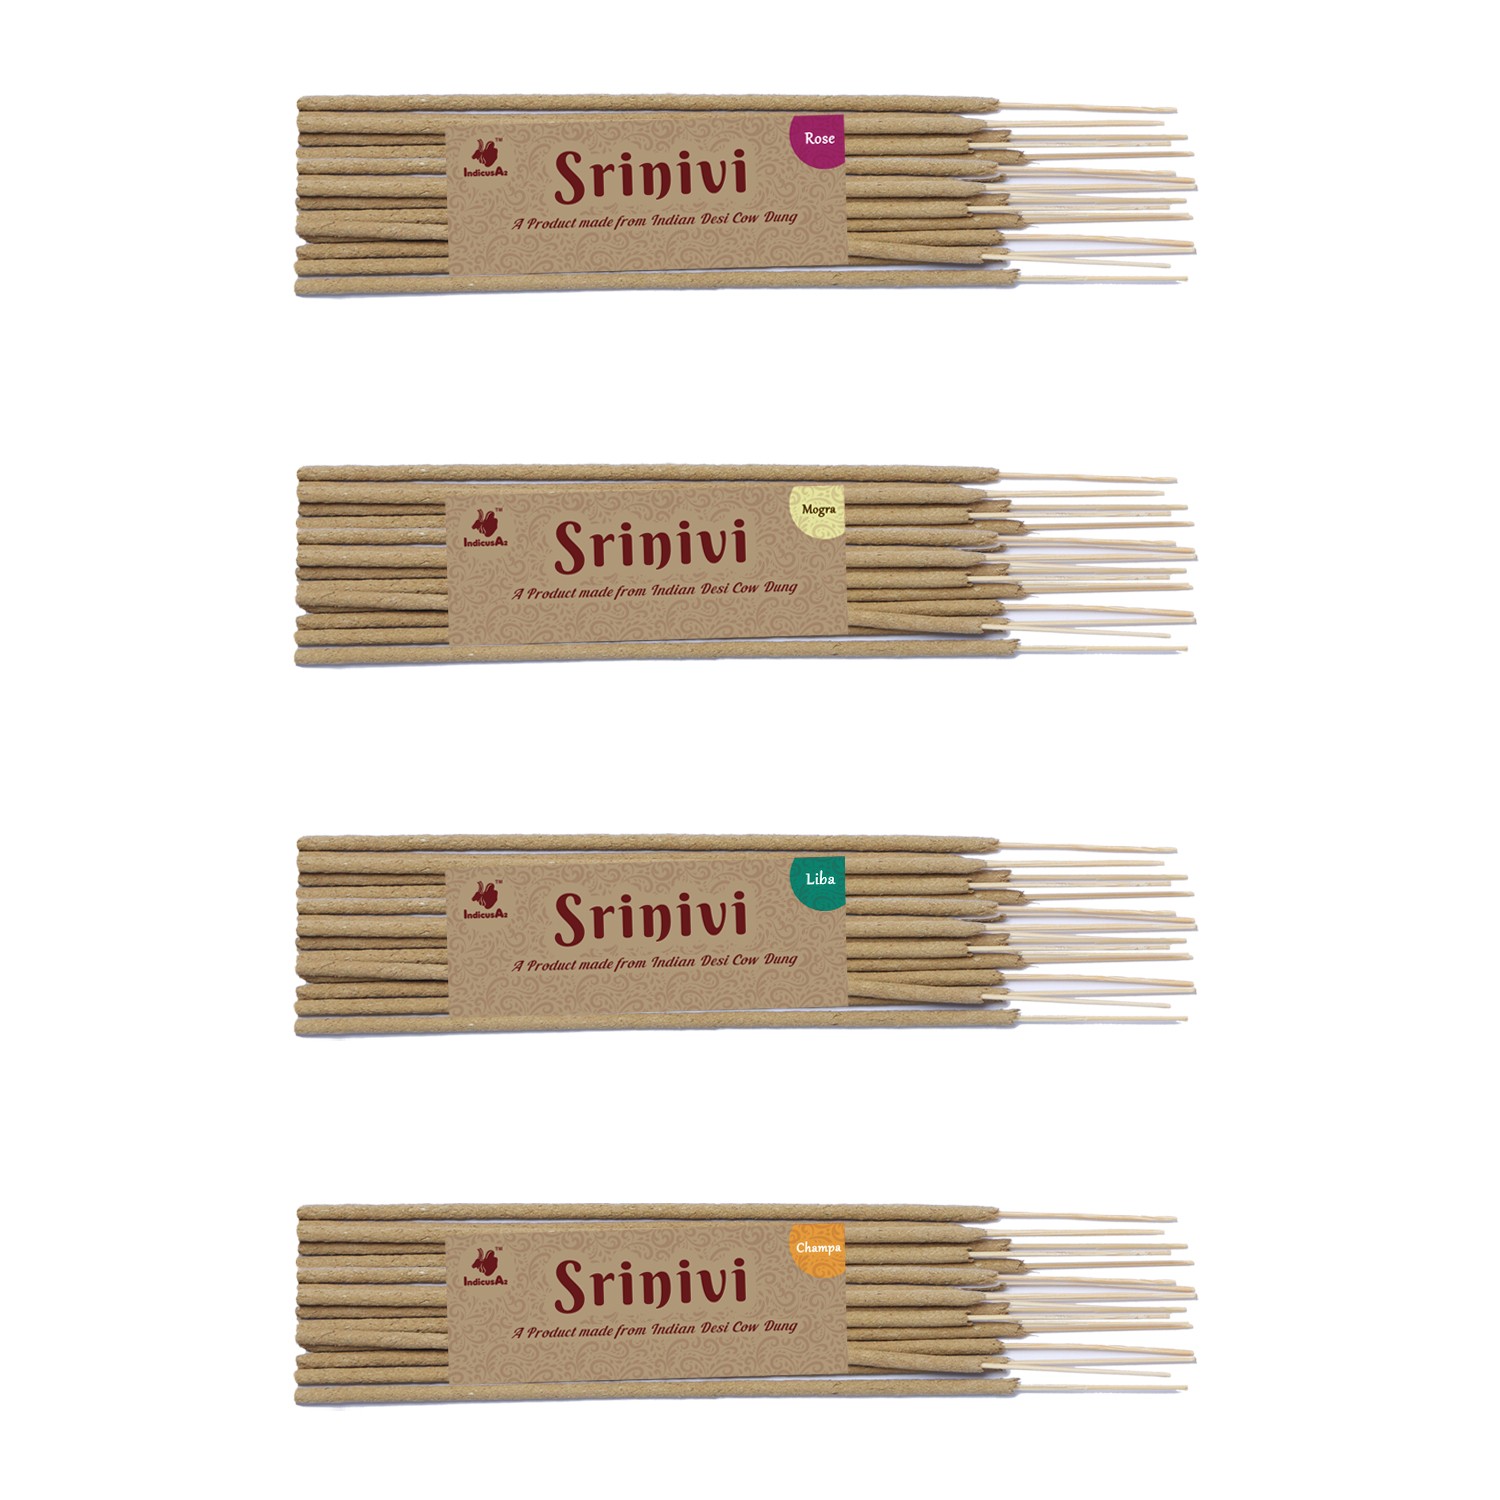 Srinivi Agarbattis - Made up of desi cow dung|Pack of 4|Each pack consists of 18 sticks|Fragrance – Rose, Mogra, Champa, Liba.